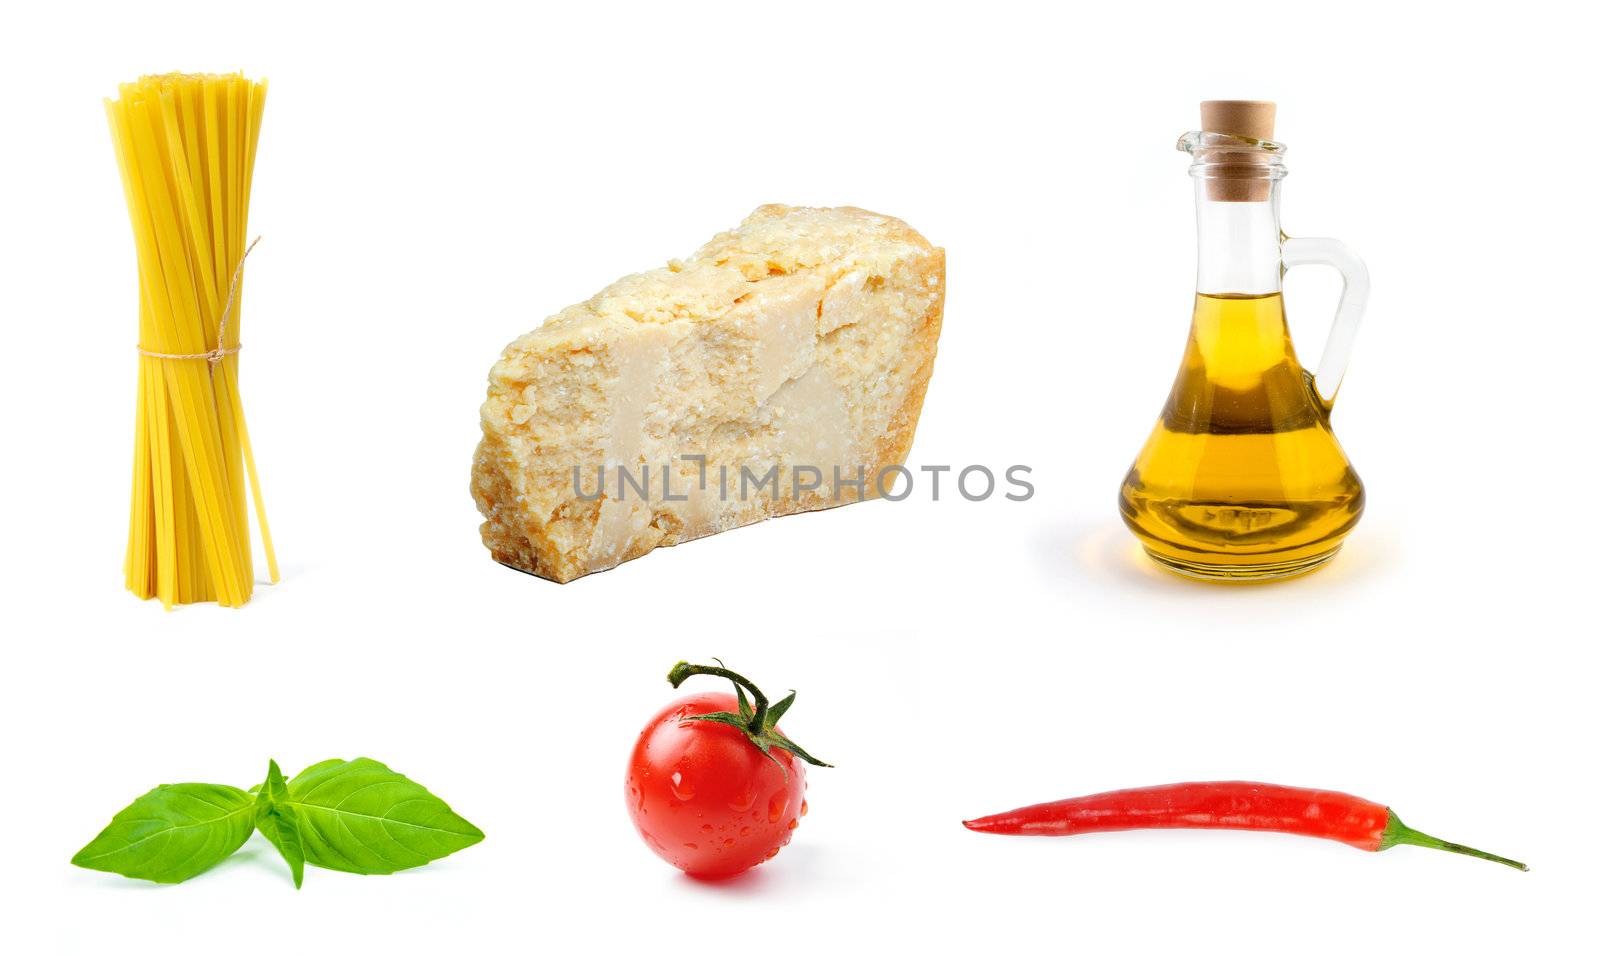 An image of pasta, cheese, oil, tomato, basil and pepper